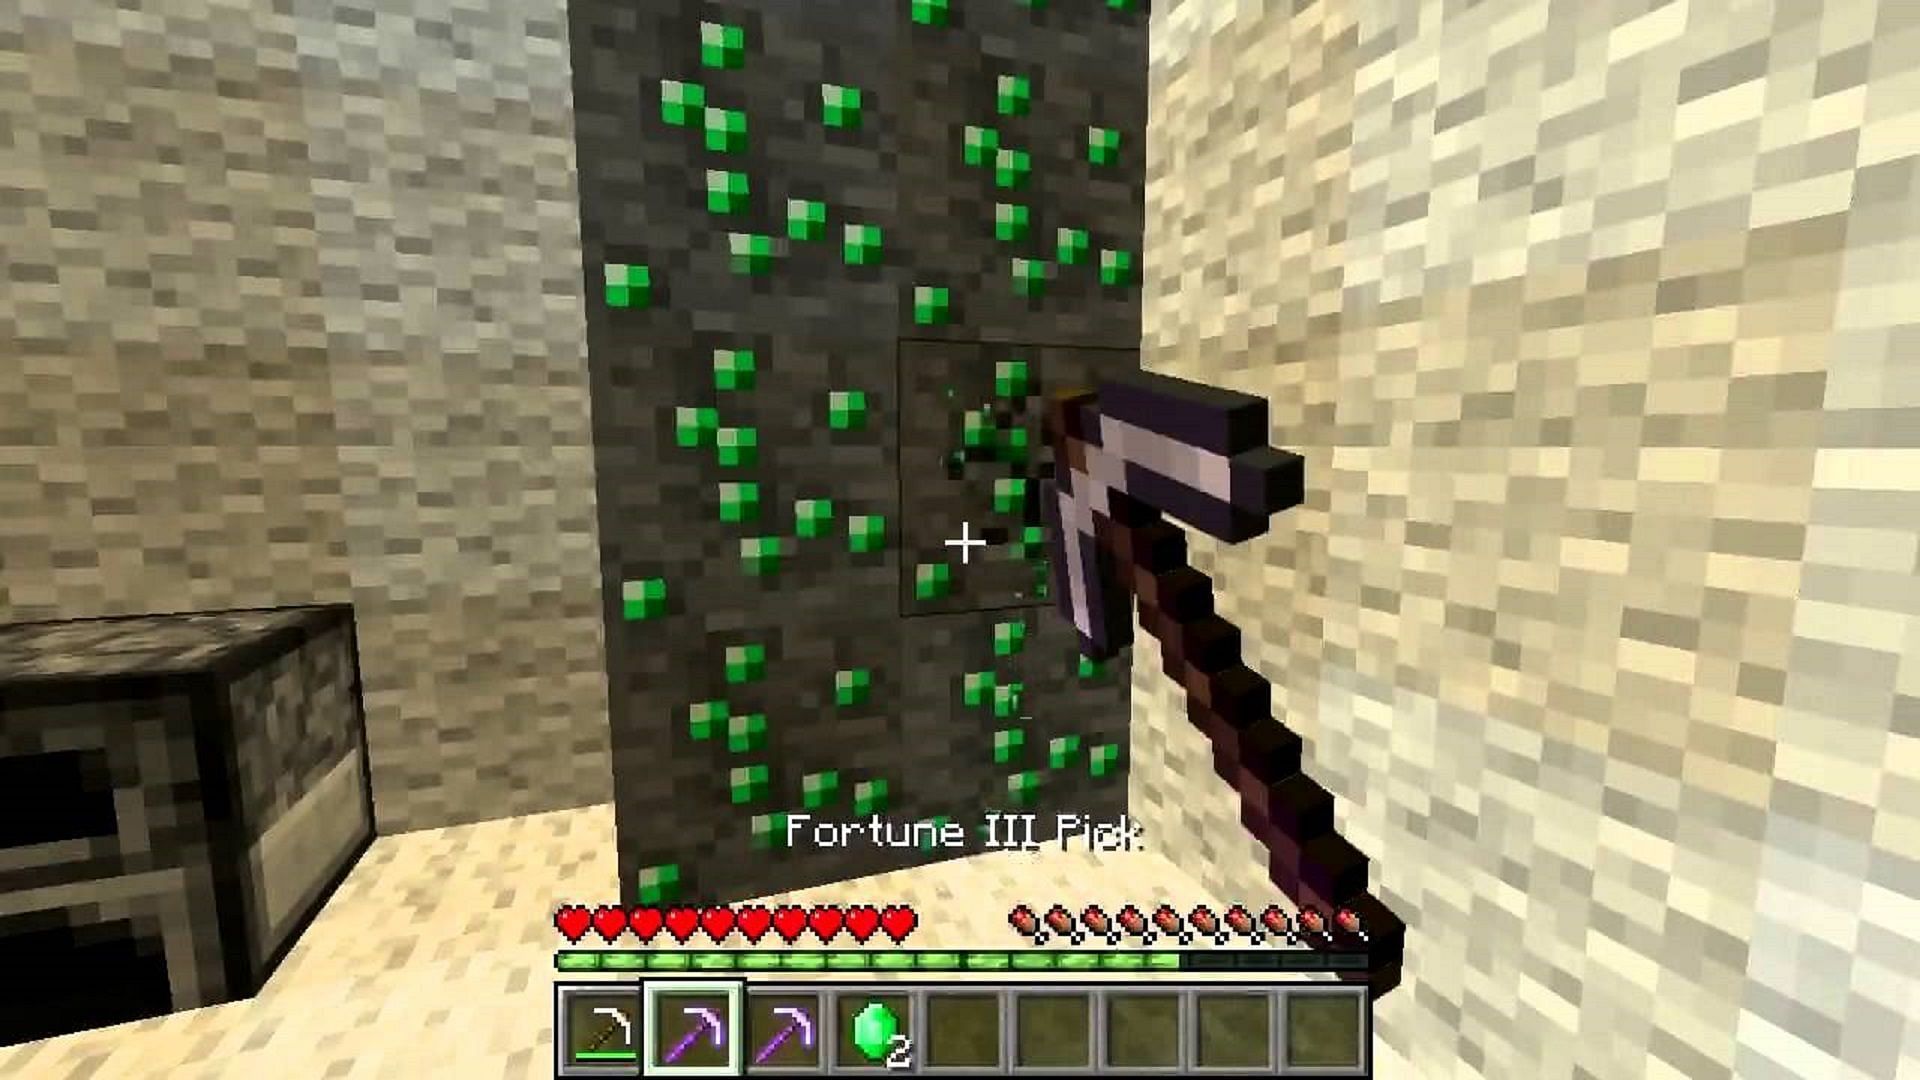 Emerald ore being mined (Image via Mcspotlights/Youtube)